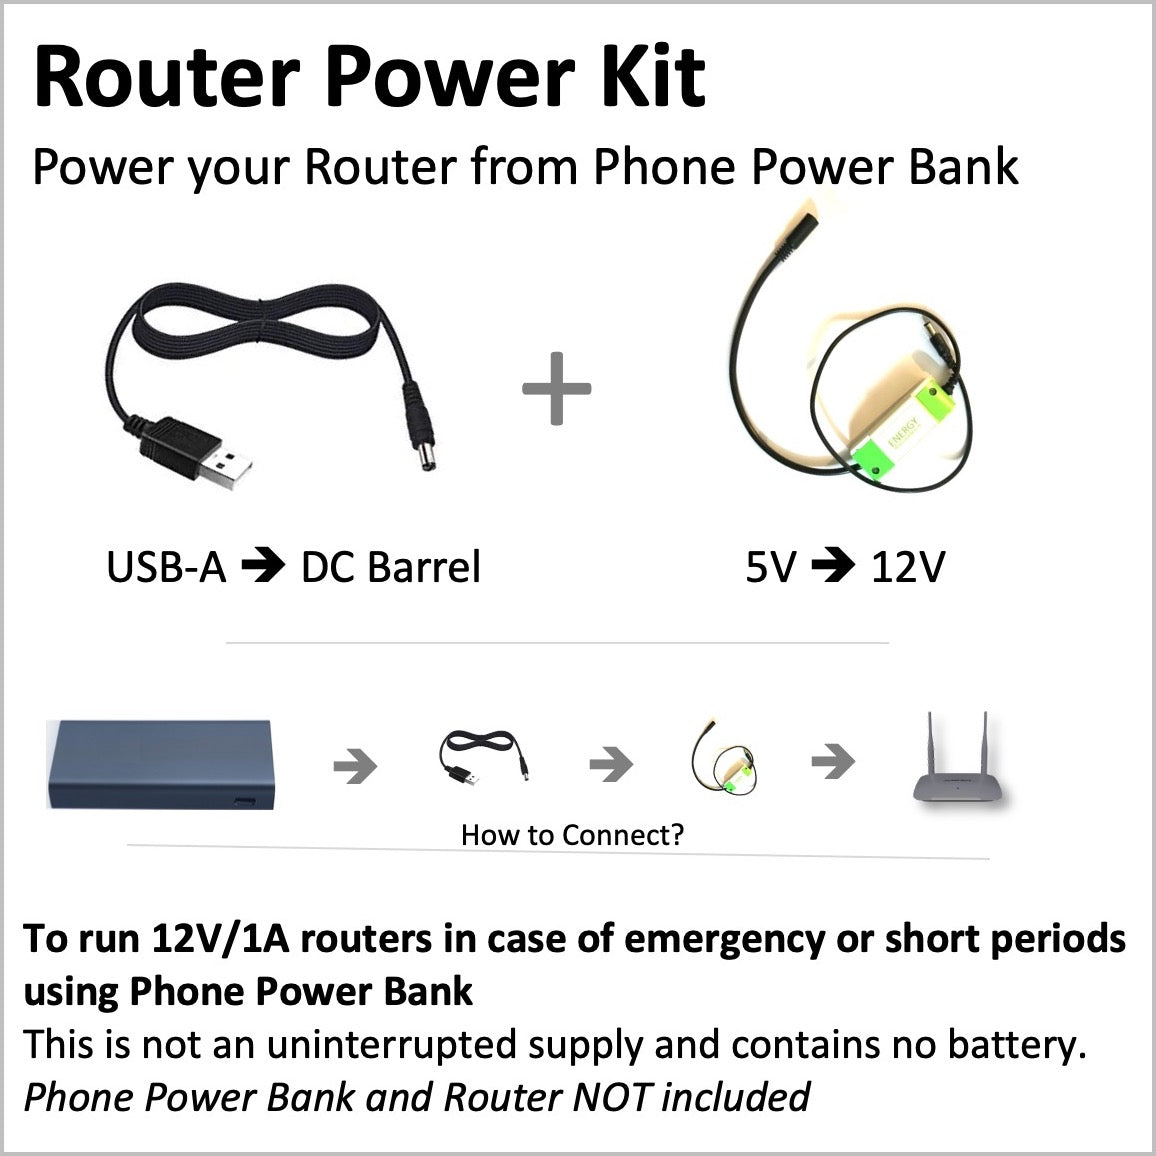 Router Power Kit - Run your Router from phone power bank